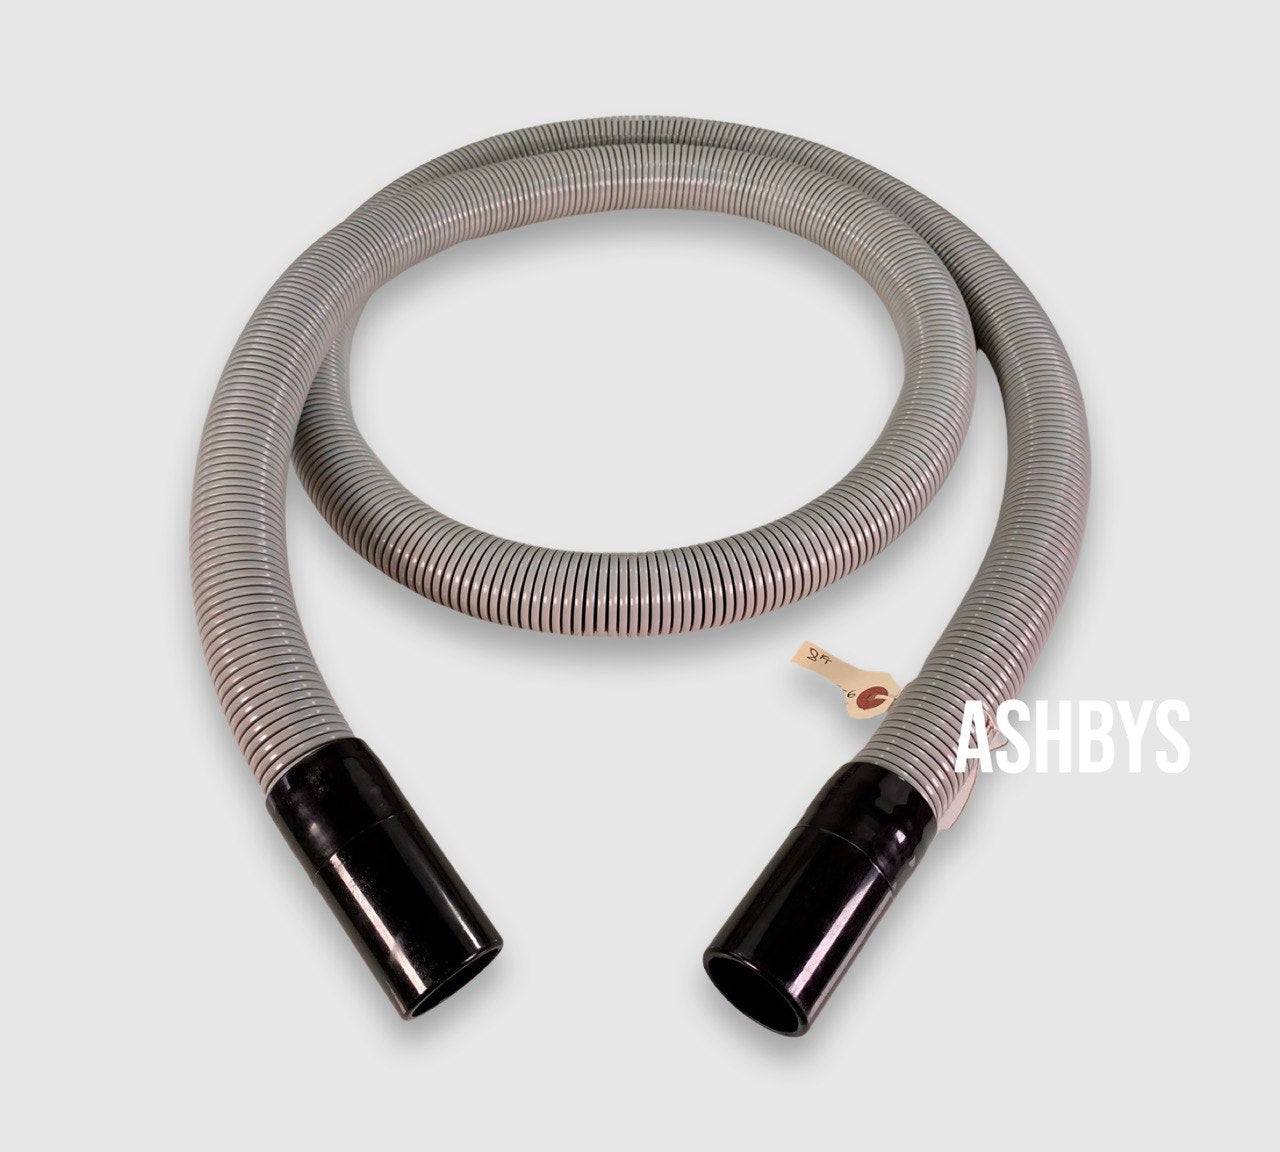 8ft (NOT 25FT) GREY 32mm Vacuum Hose ONLY fitted with 2 x 1.5 inch Vacuum Cuffs